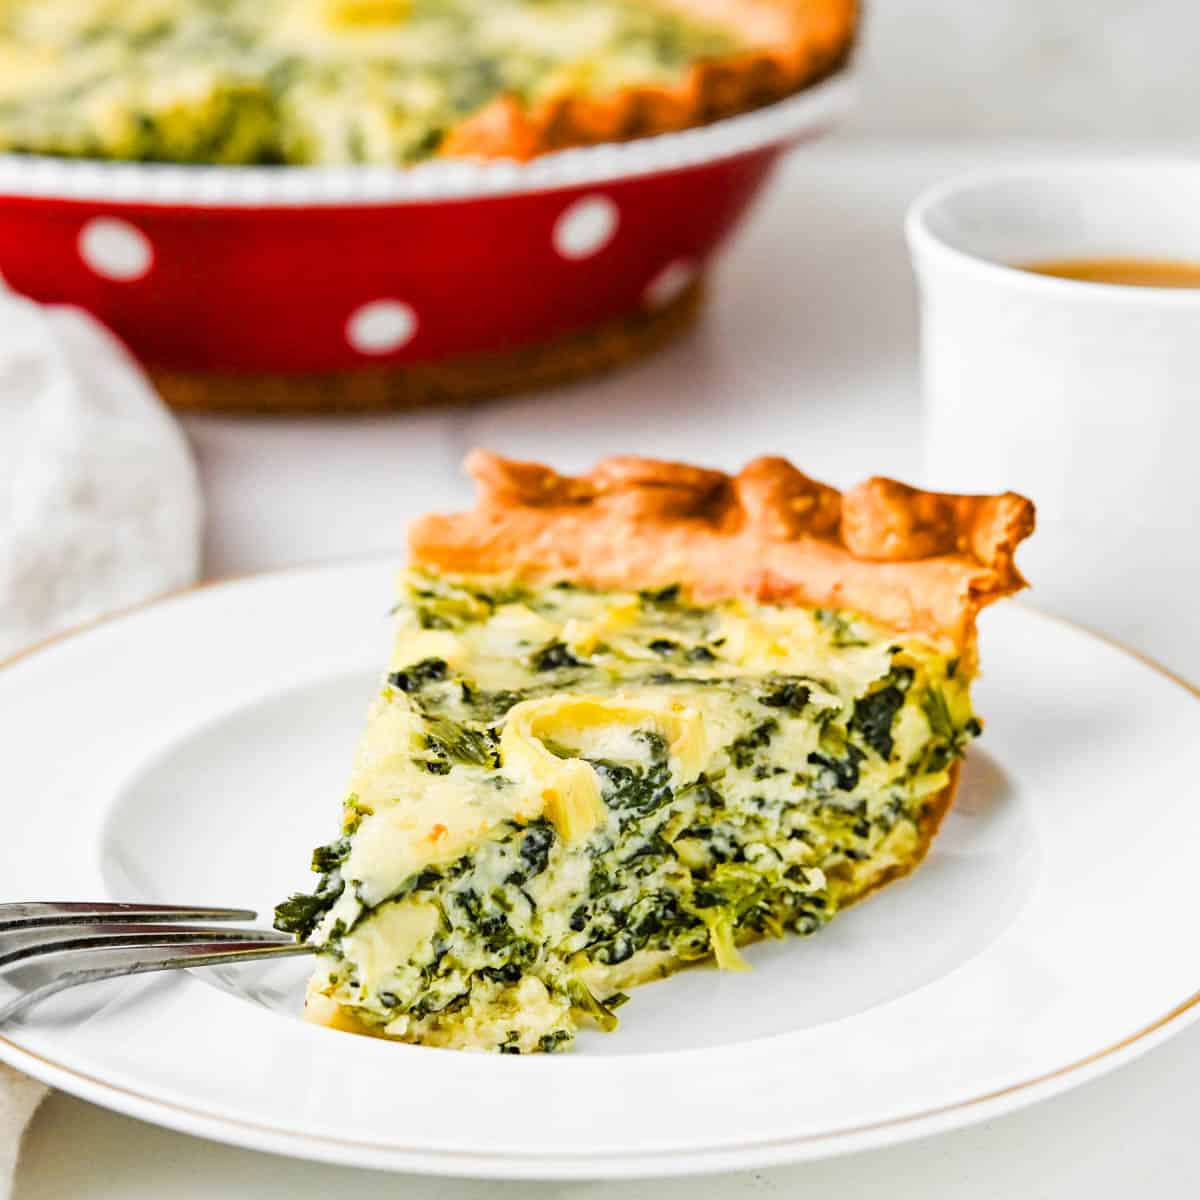 A slice of spinach artichoke quiche on a plate with a cup of coffee.